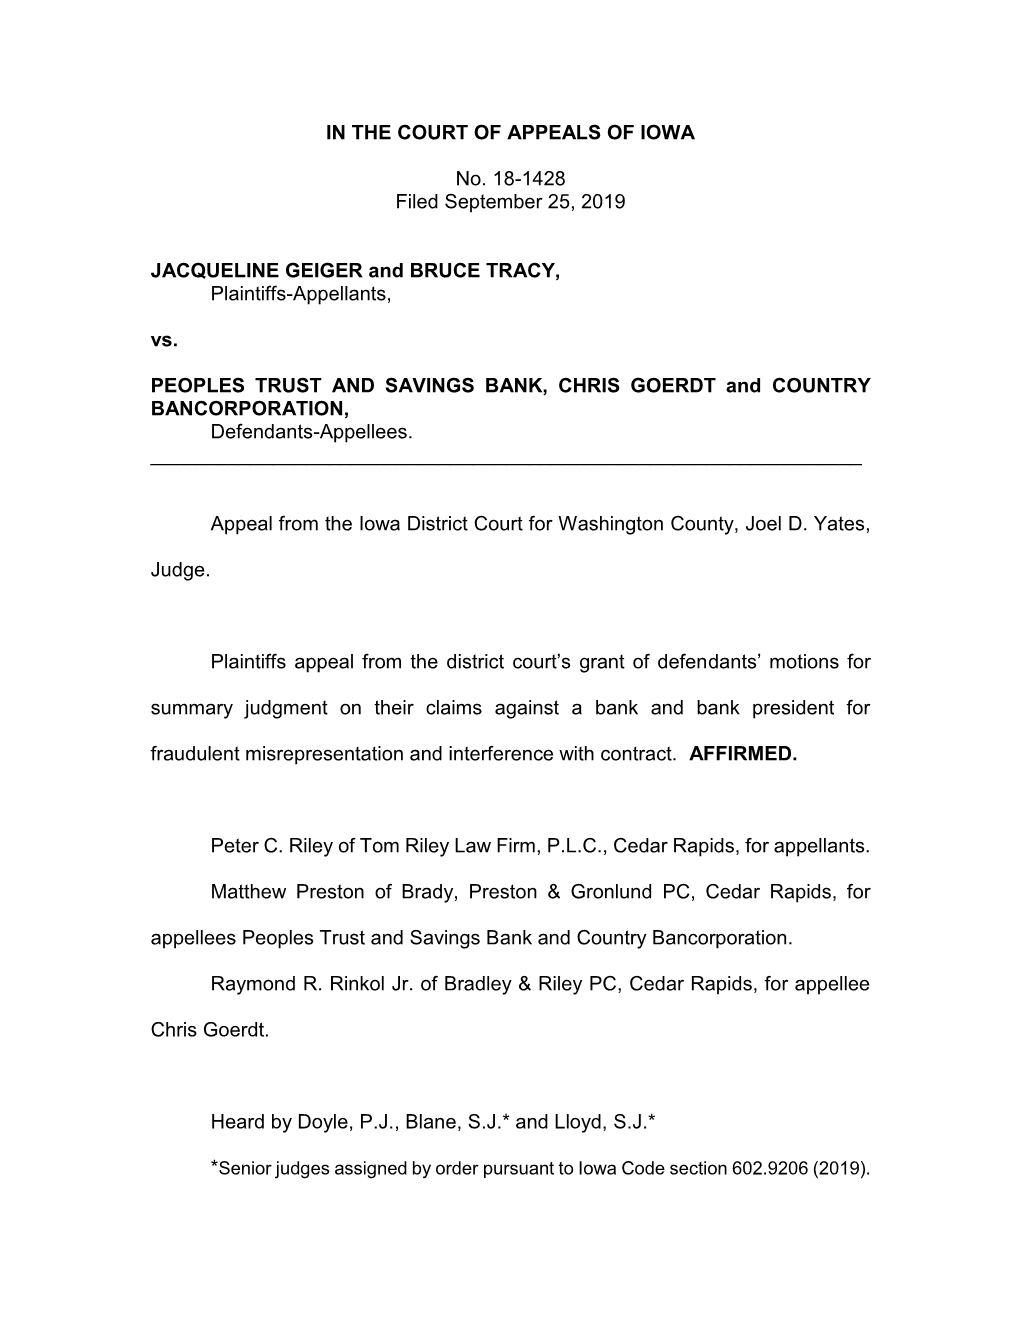 IN the COURT of APPEALS of IOWA No. 18-1428 Filed September 25, 2019 JACQUELINE GEIGER and BRUCE TRACY, Plaintiffs-Appellants, V